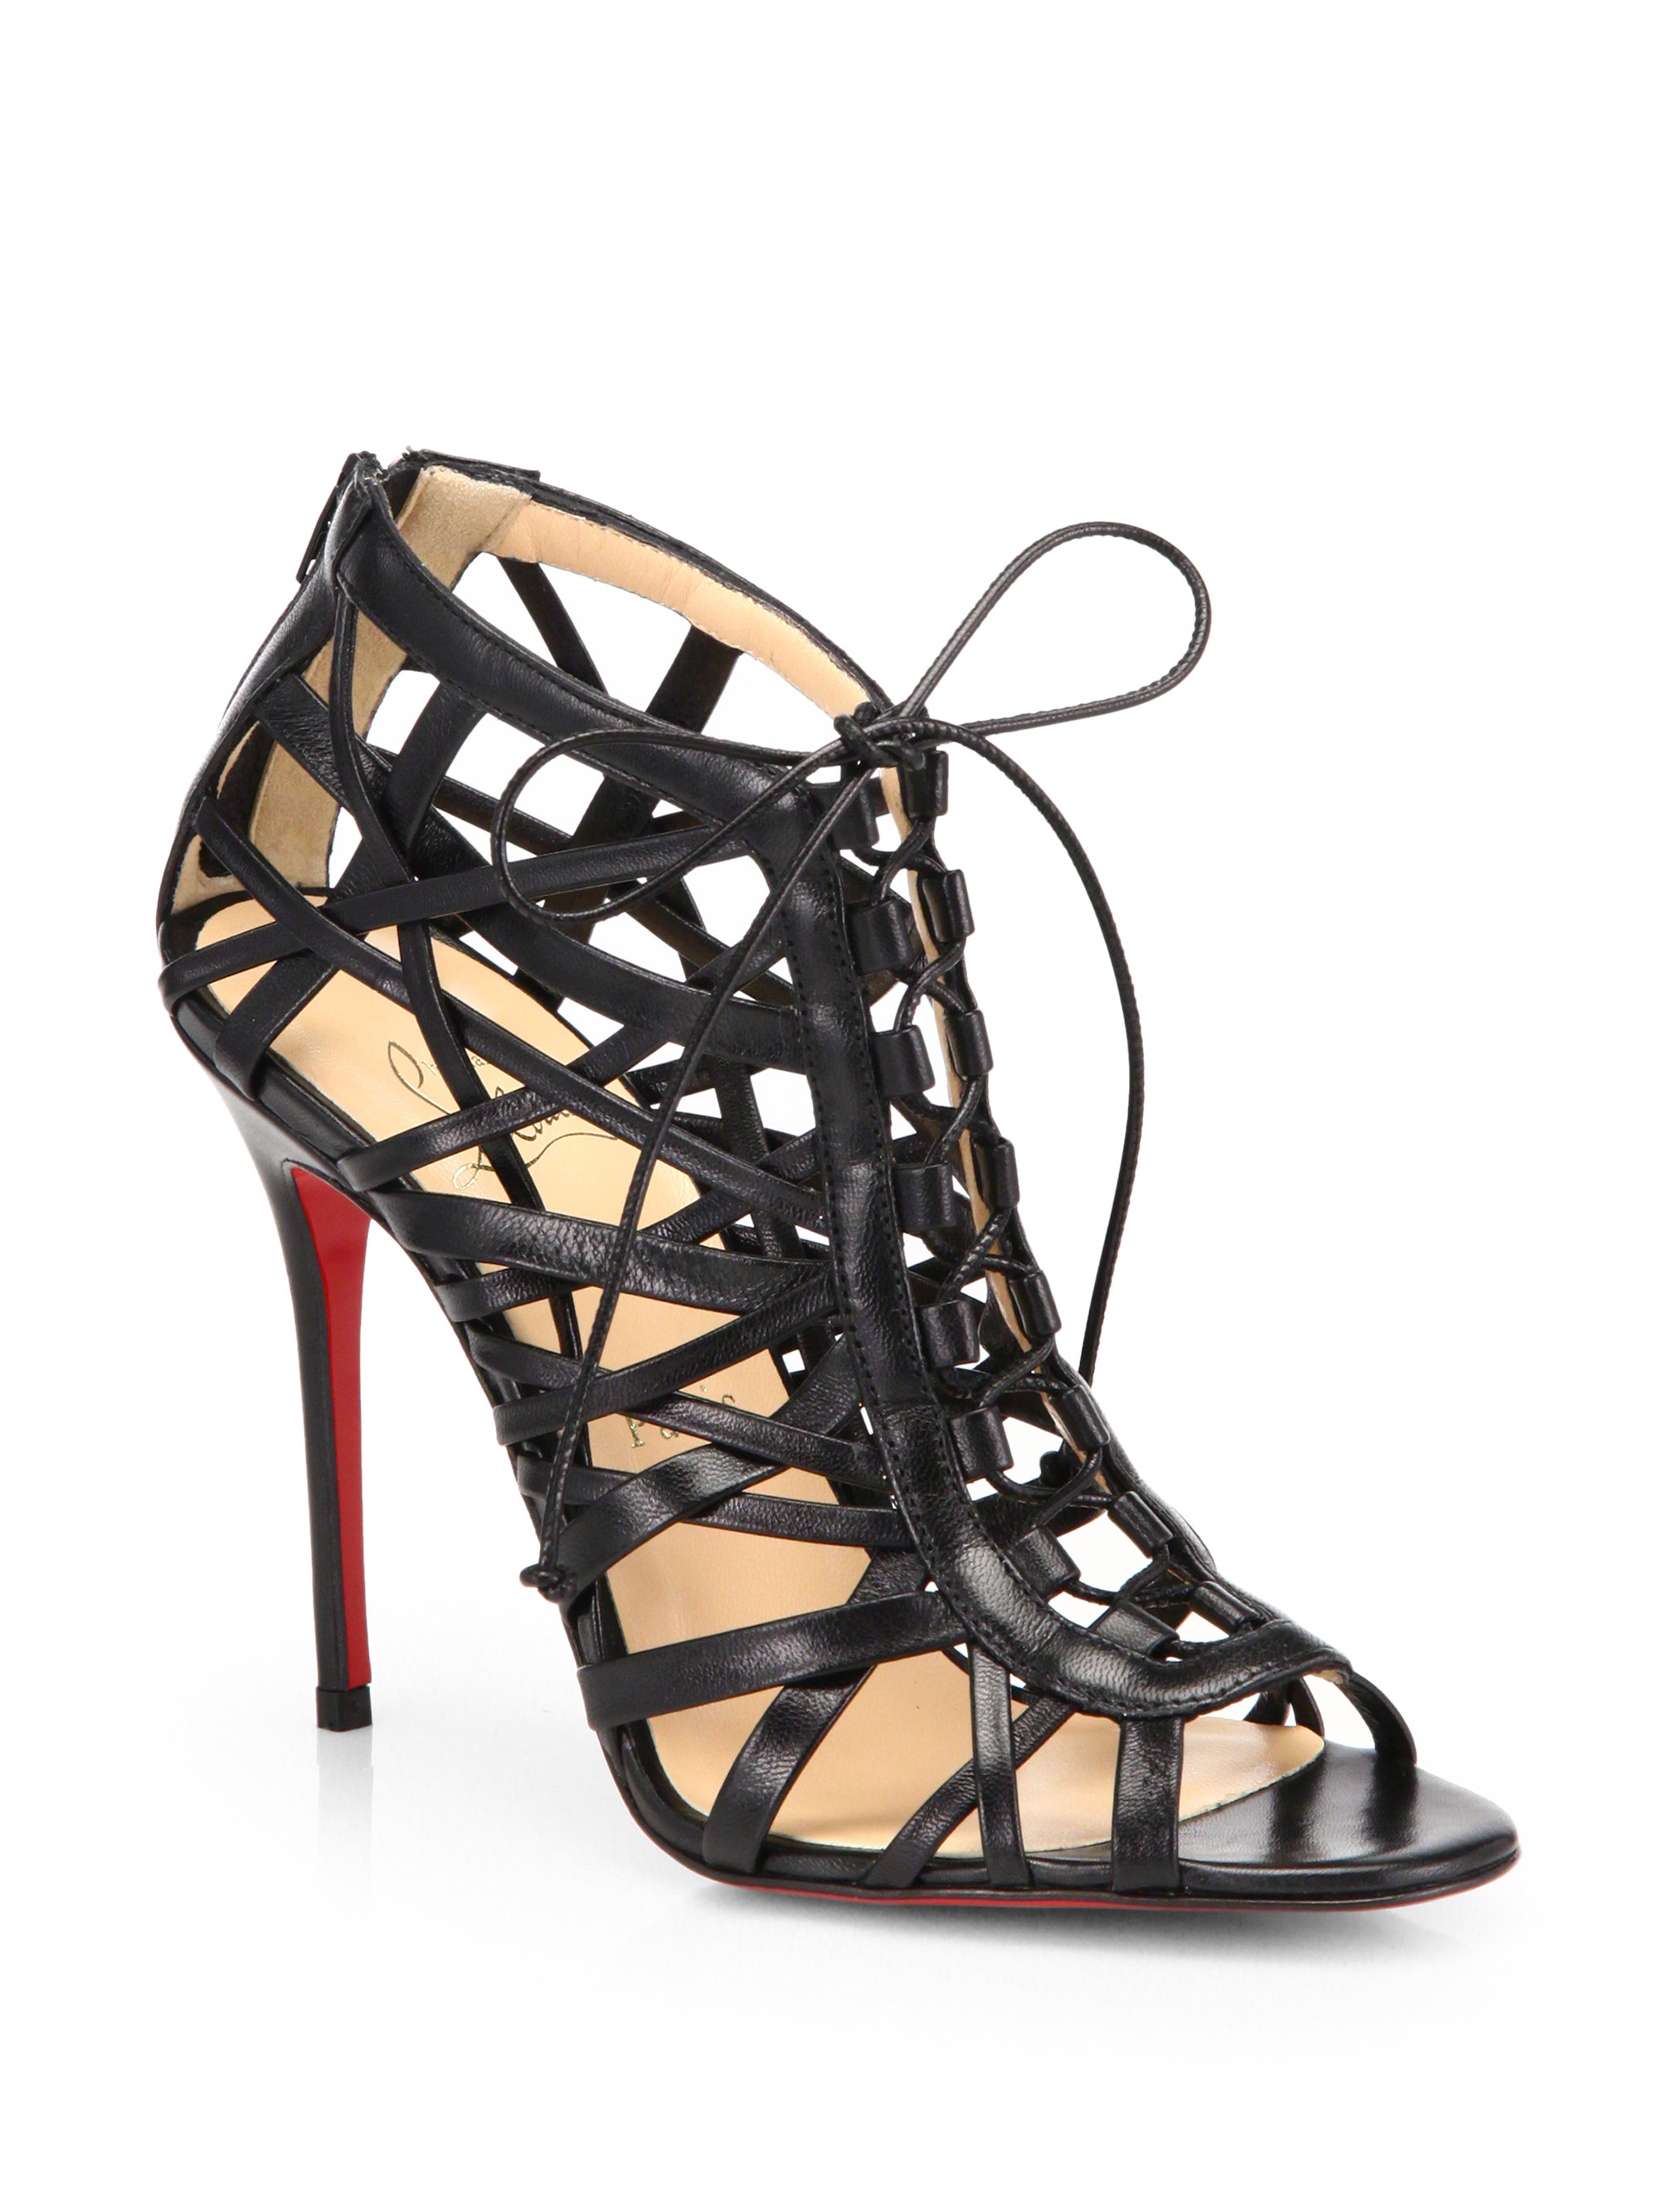 Christian Louboutin Laurence Leather Cage Laceup Sandals in Black - Lyst